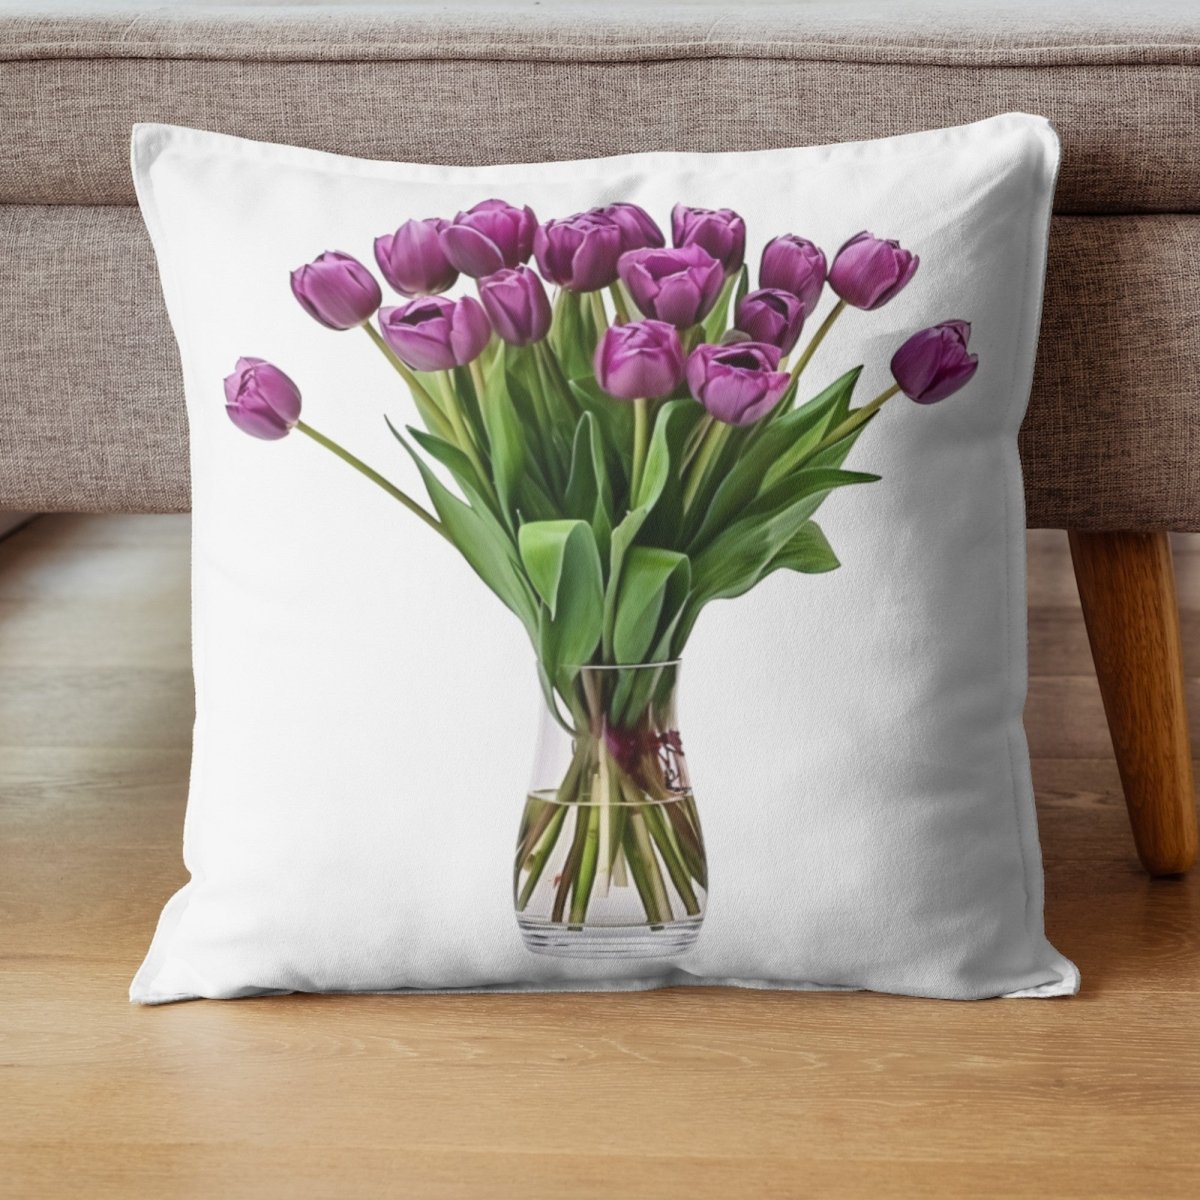 Purple Tulips in Vase 6+6 PNG Clipart Bundle,Transparent Background, Photorealistic - Everything Pixel